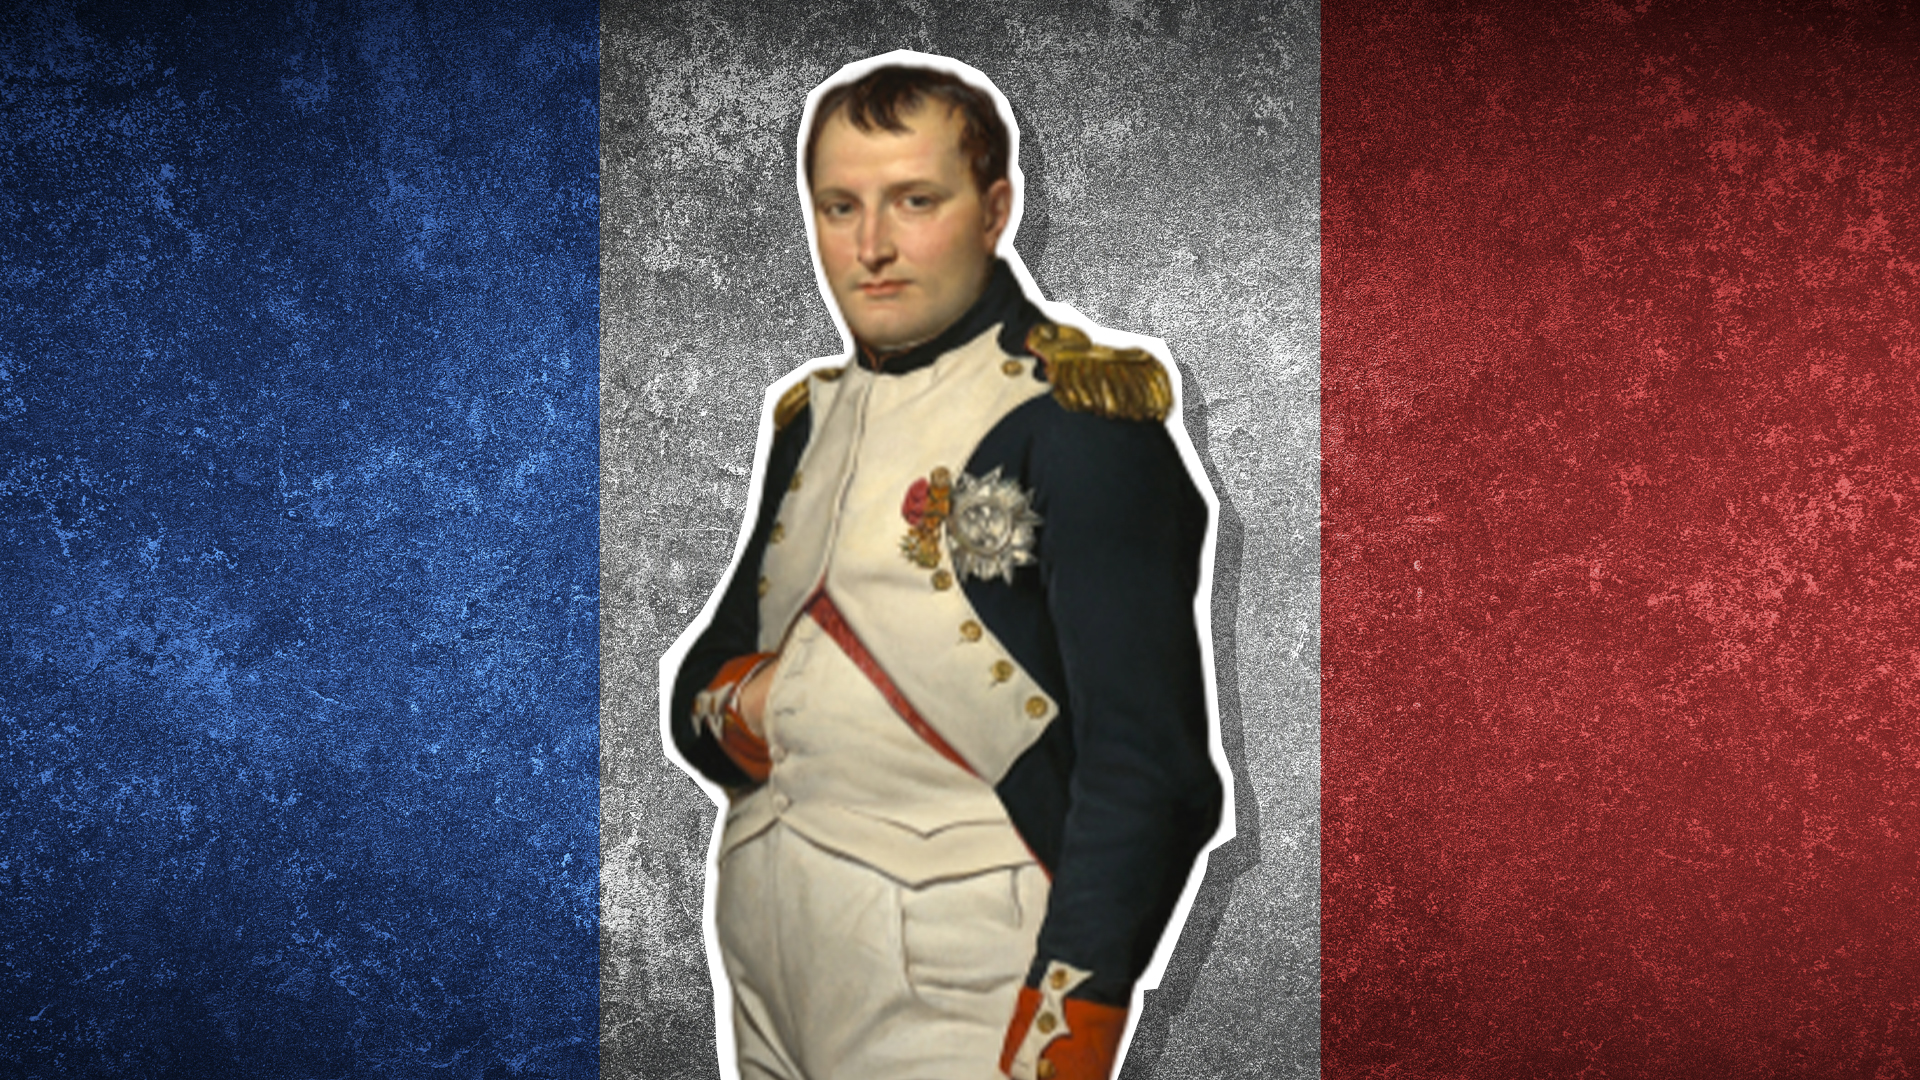 A French military leader